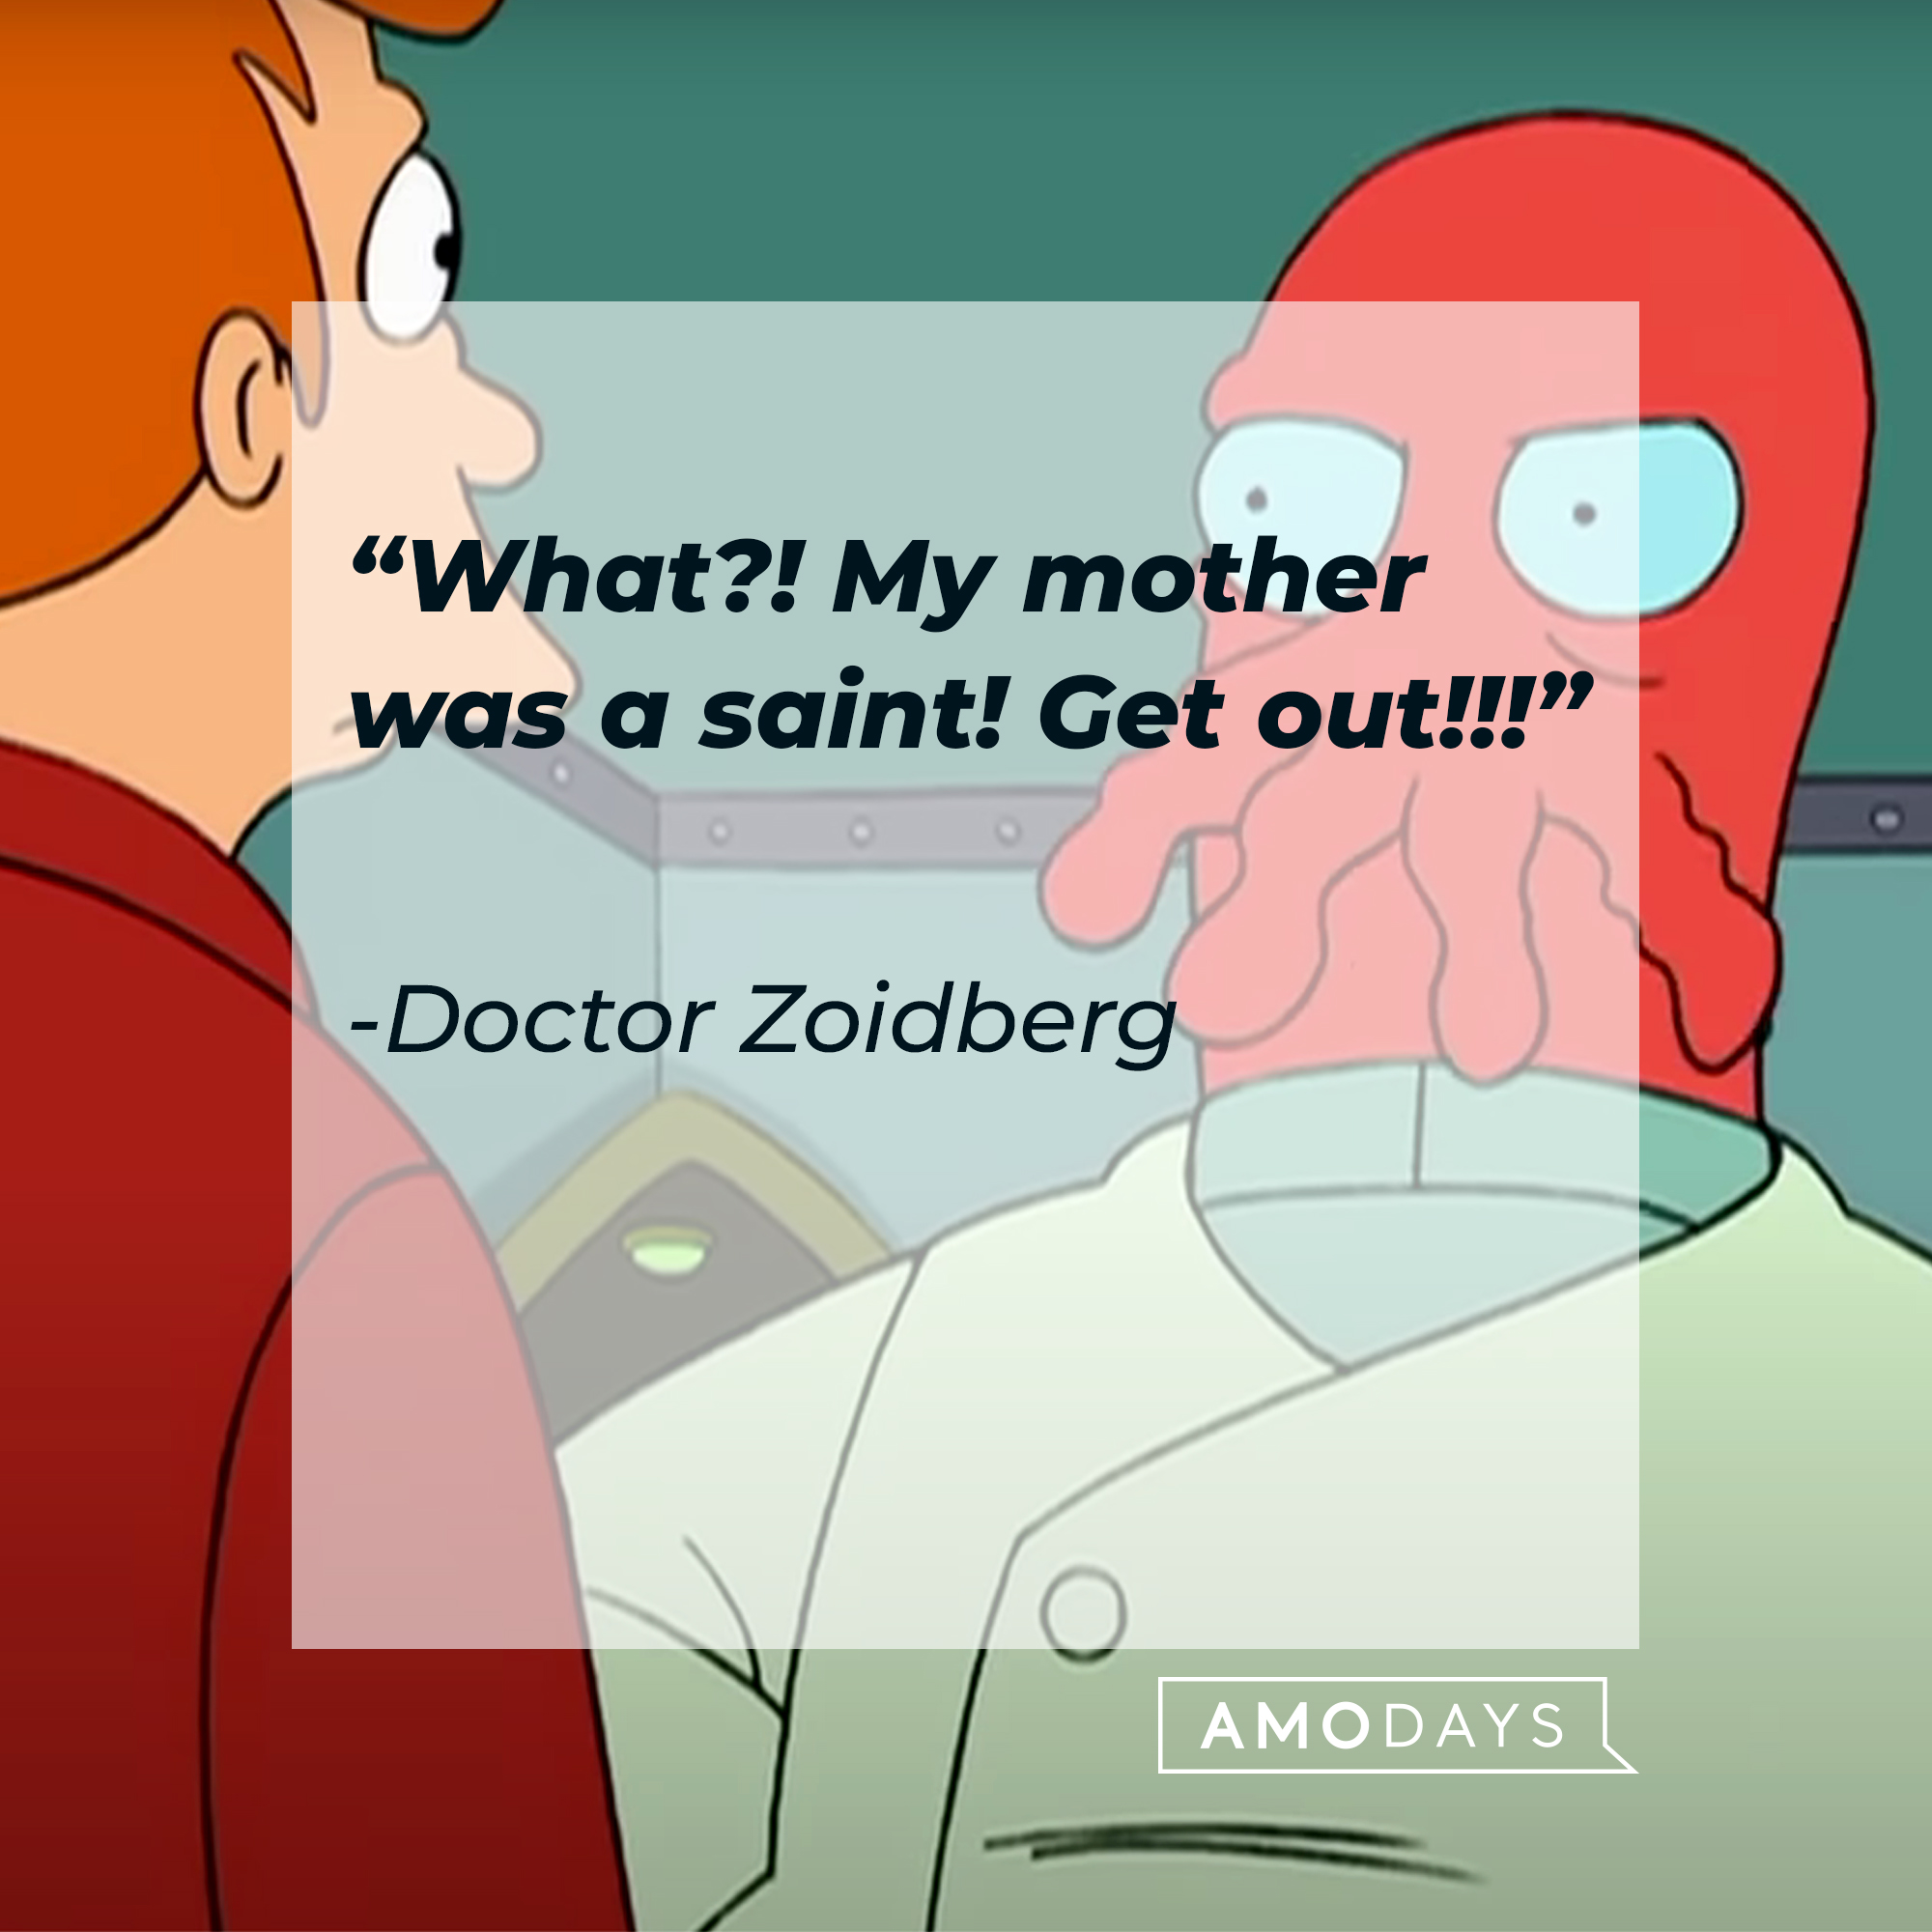 Doctor Zoidberg with one other character and his quote: “What?! My mother was a saint! Get out!!!”  | Source:  facebook.com/Futurama